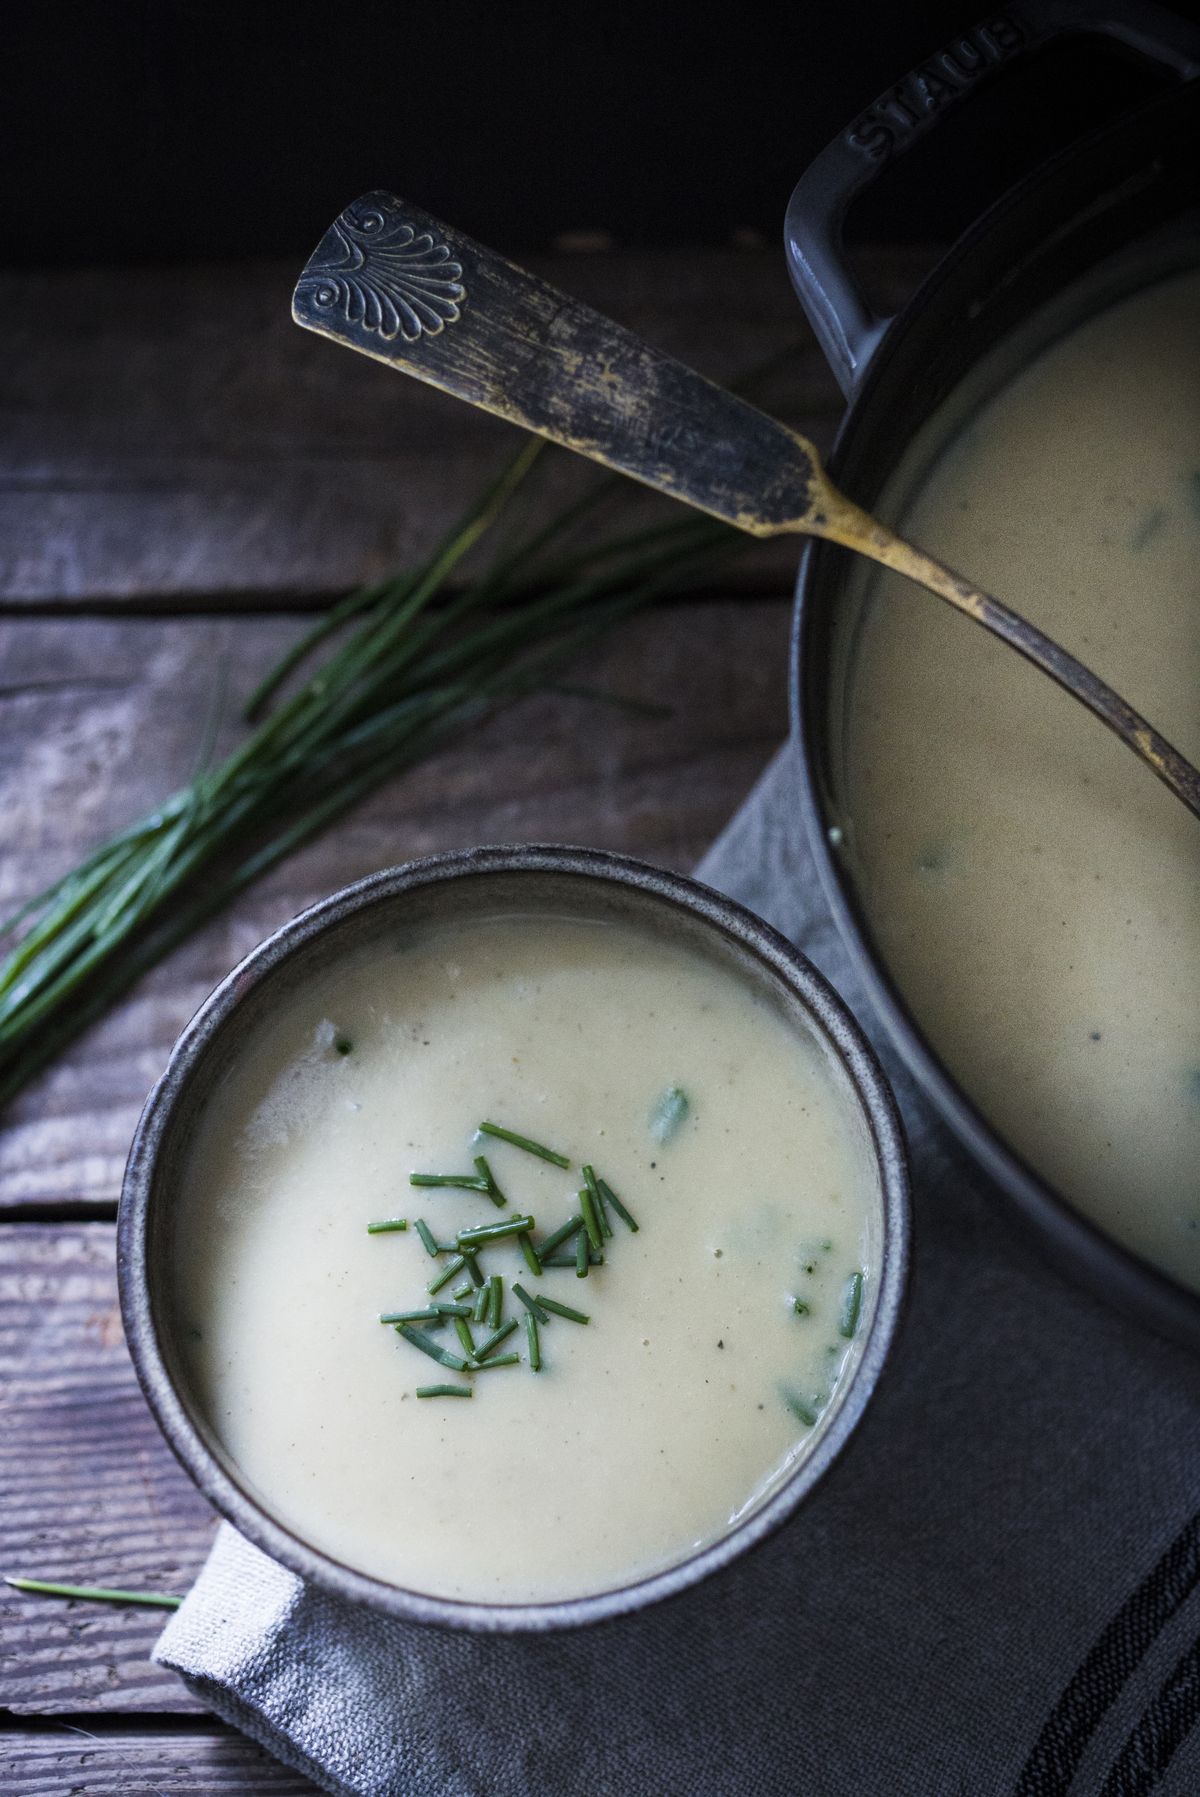 Potatoes, comforting and healthy, are the key ingredient in this lightened-up version of potato leek soup, in which butter and cream are replaced with olive oil and light sour cream.